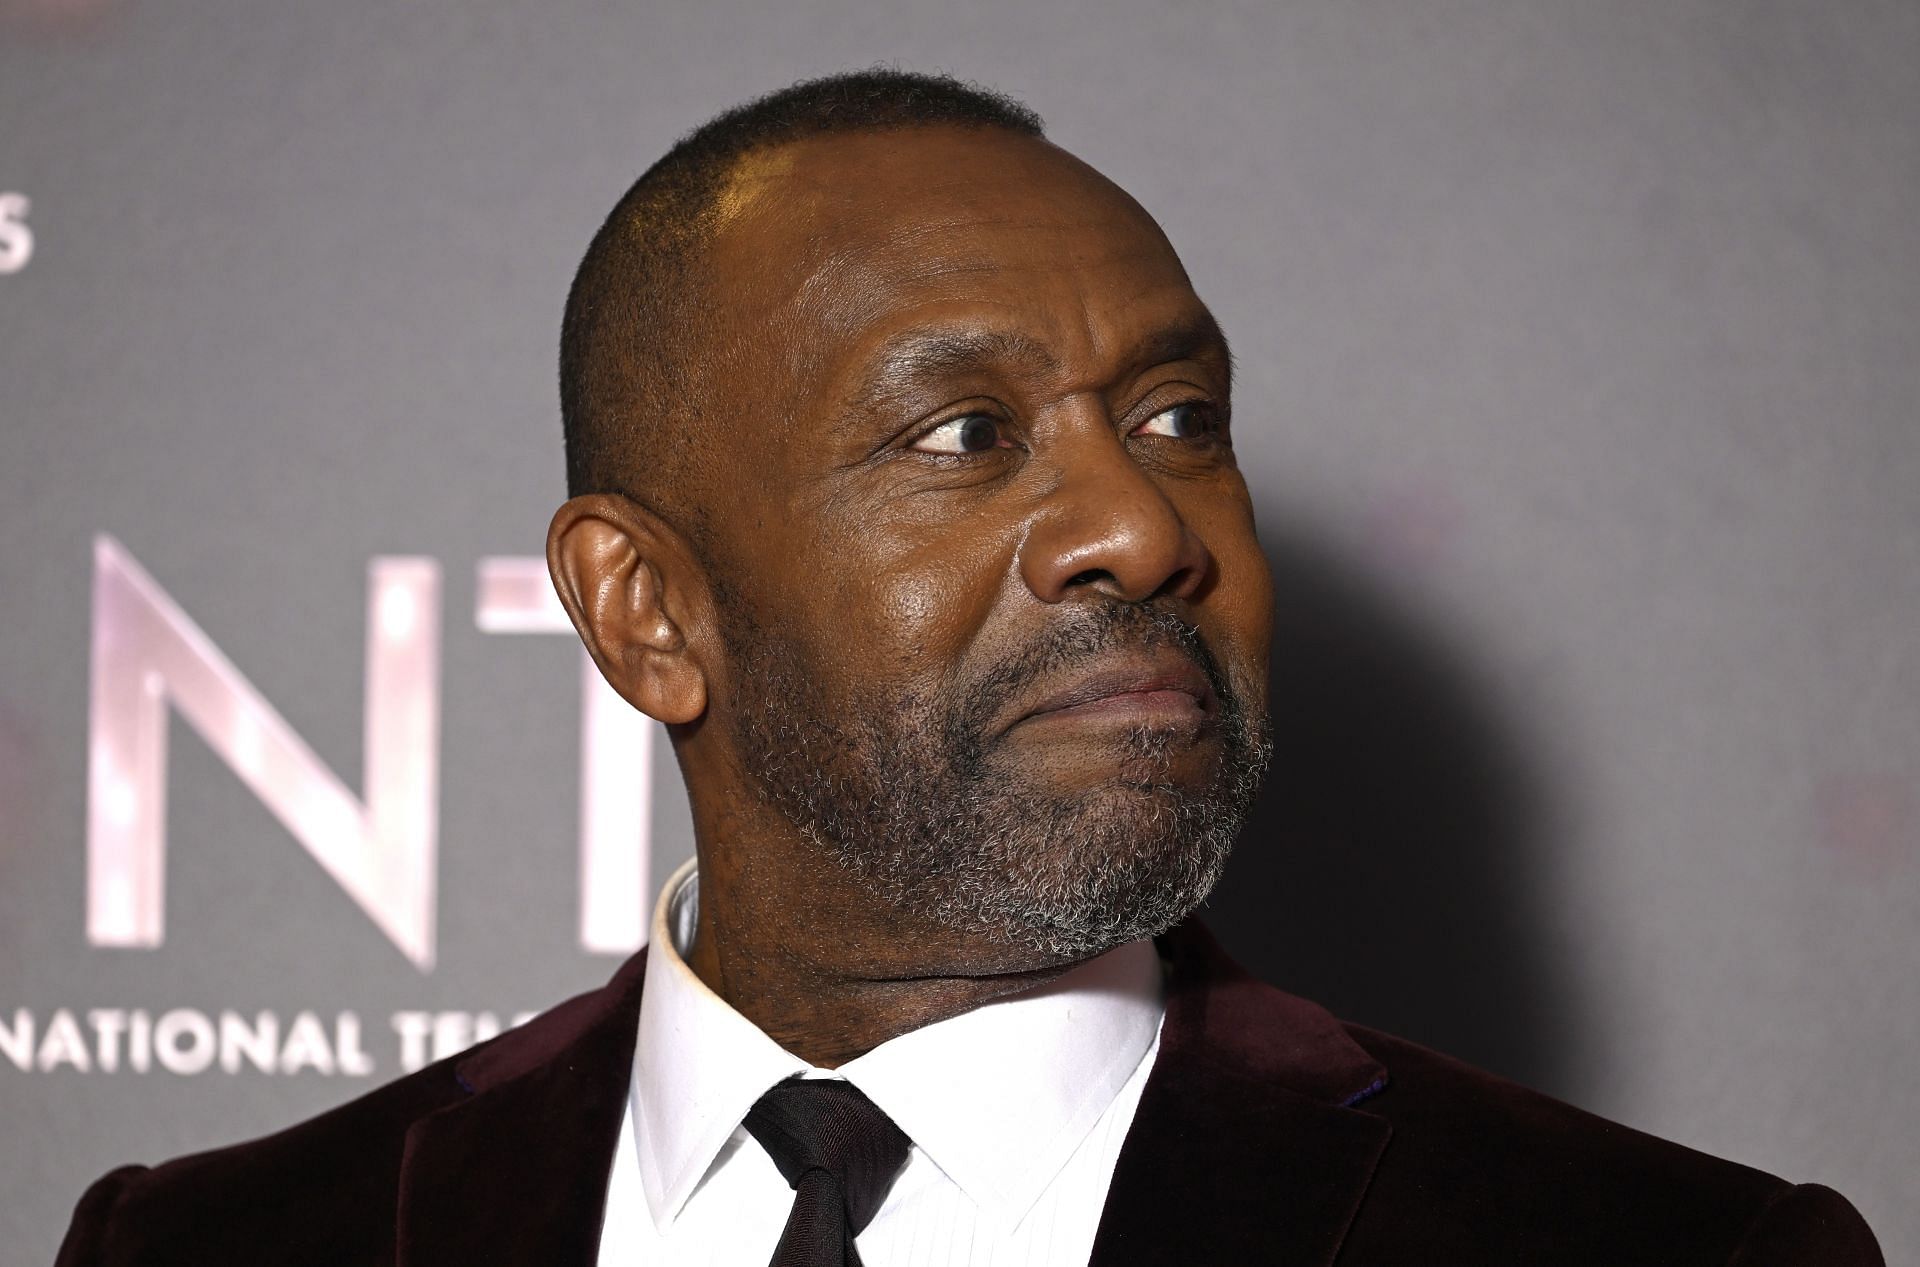 Lenny Henry shared his weight loss journey (Image via Getty)